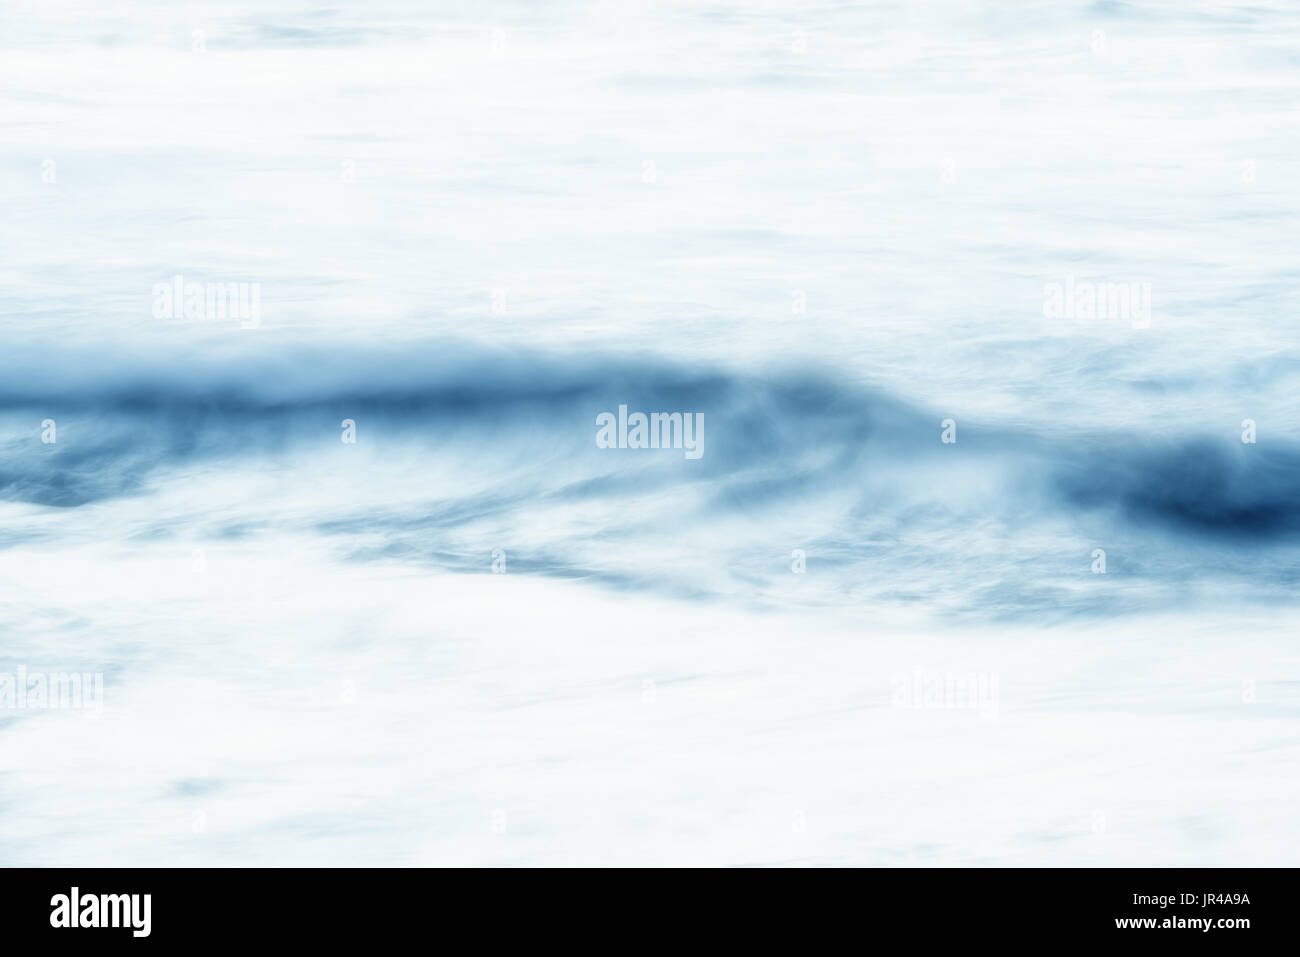 Abstract, blurry water, high key background texture image. Stock Photo